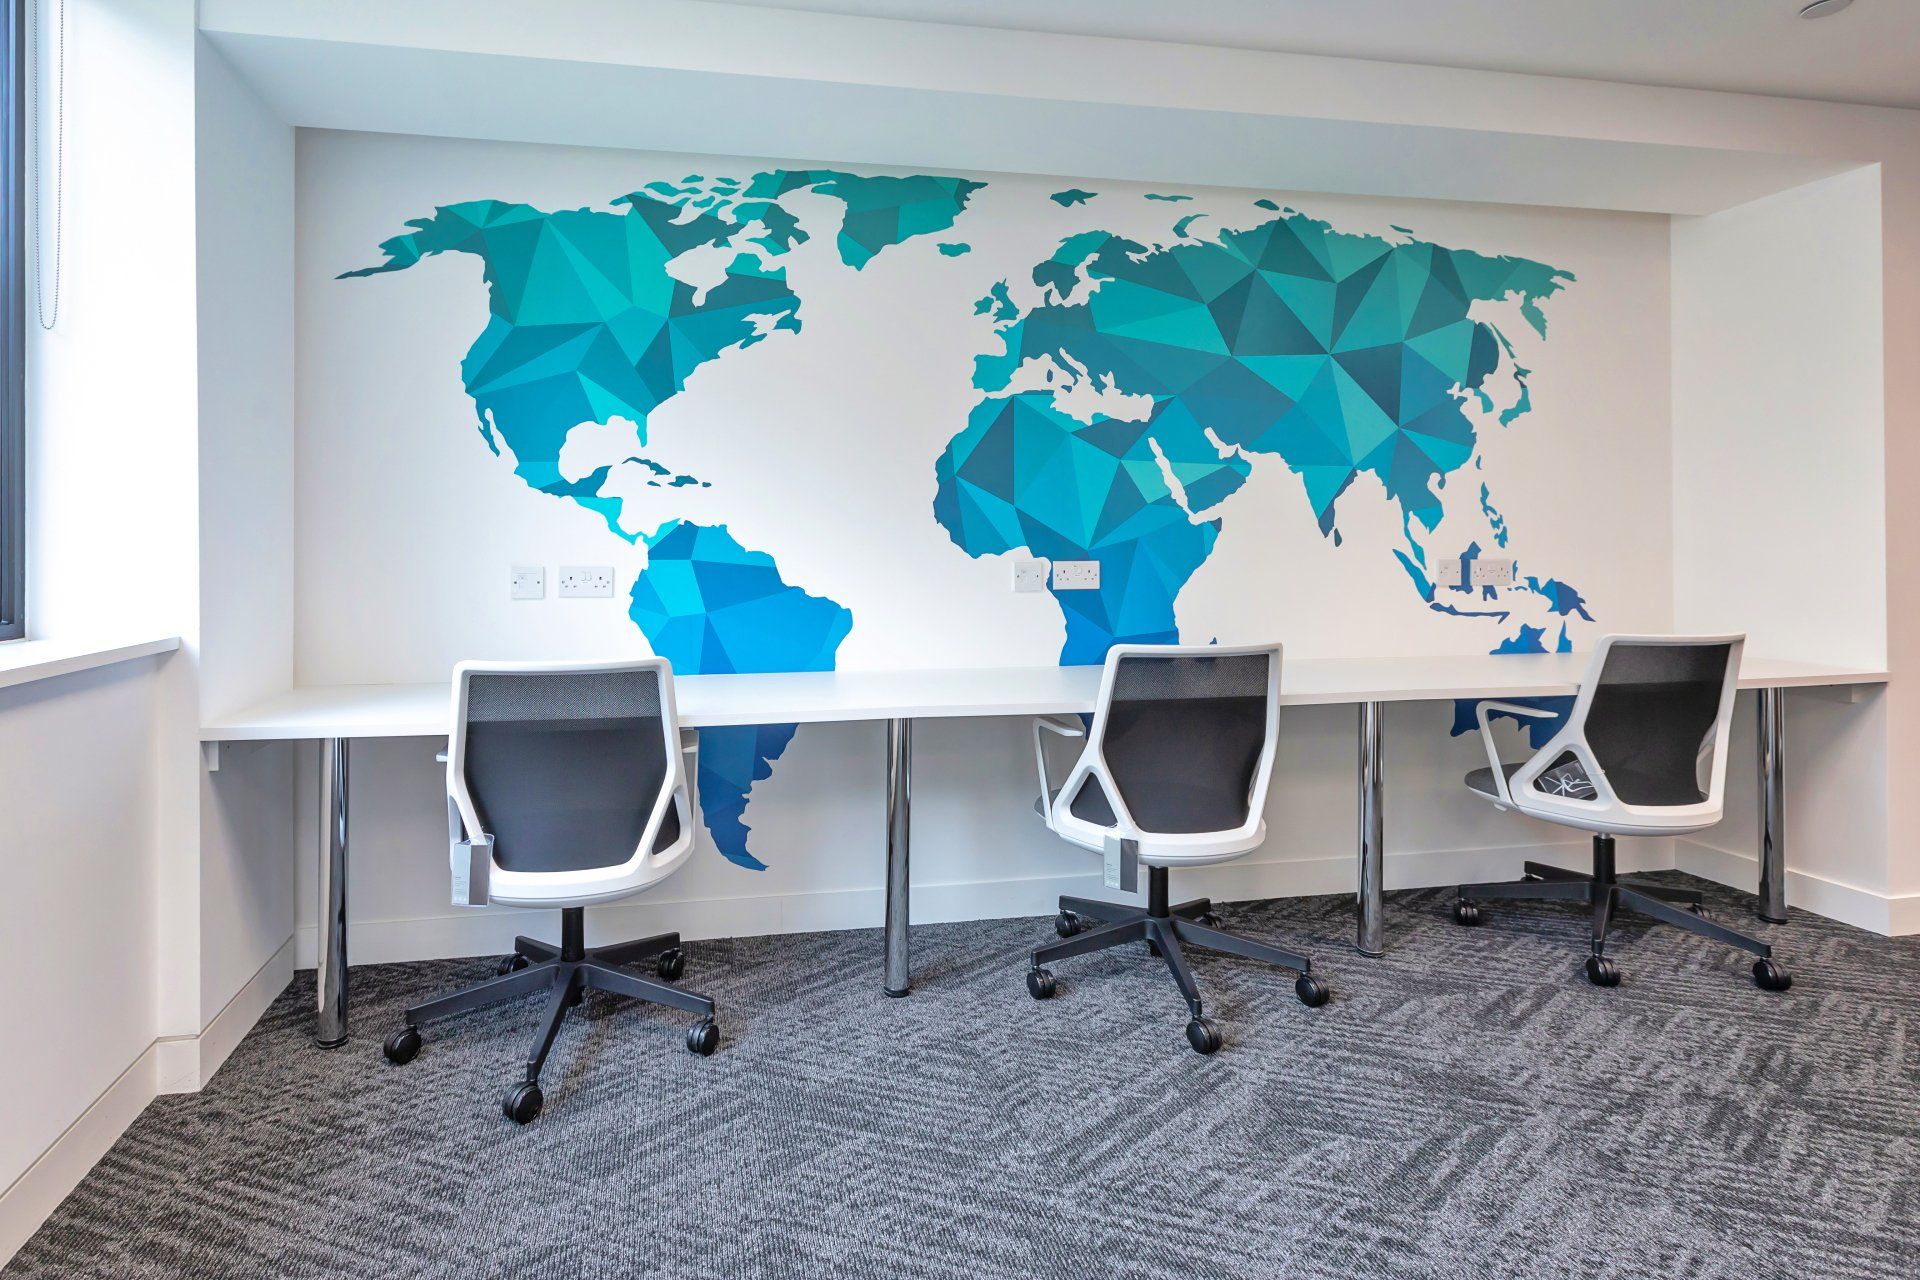 A room with three desks and chairs and a map of the world on the wall.